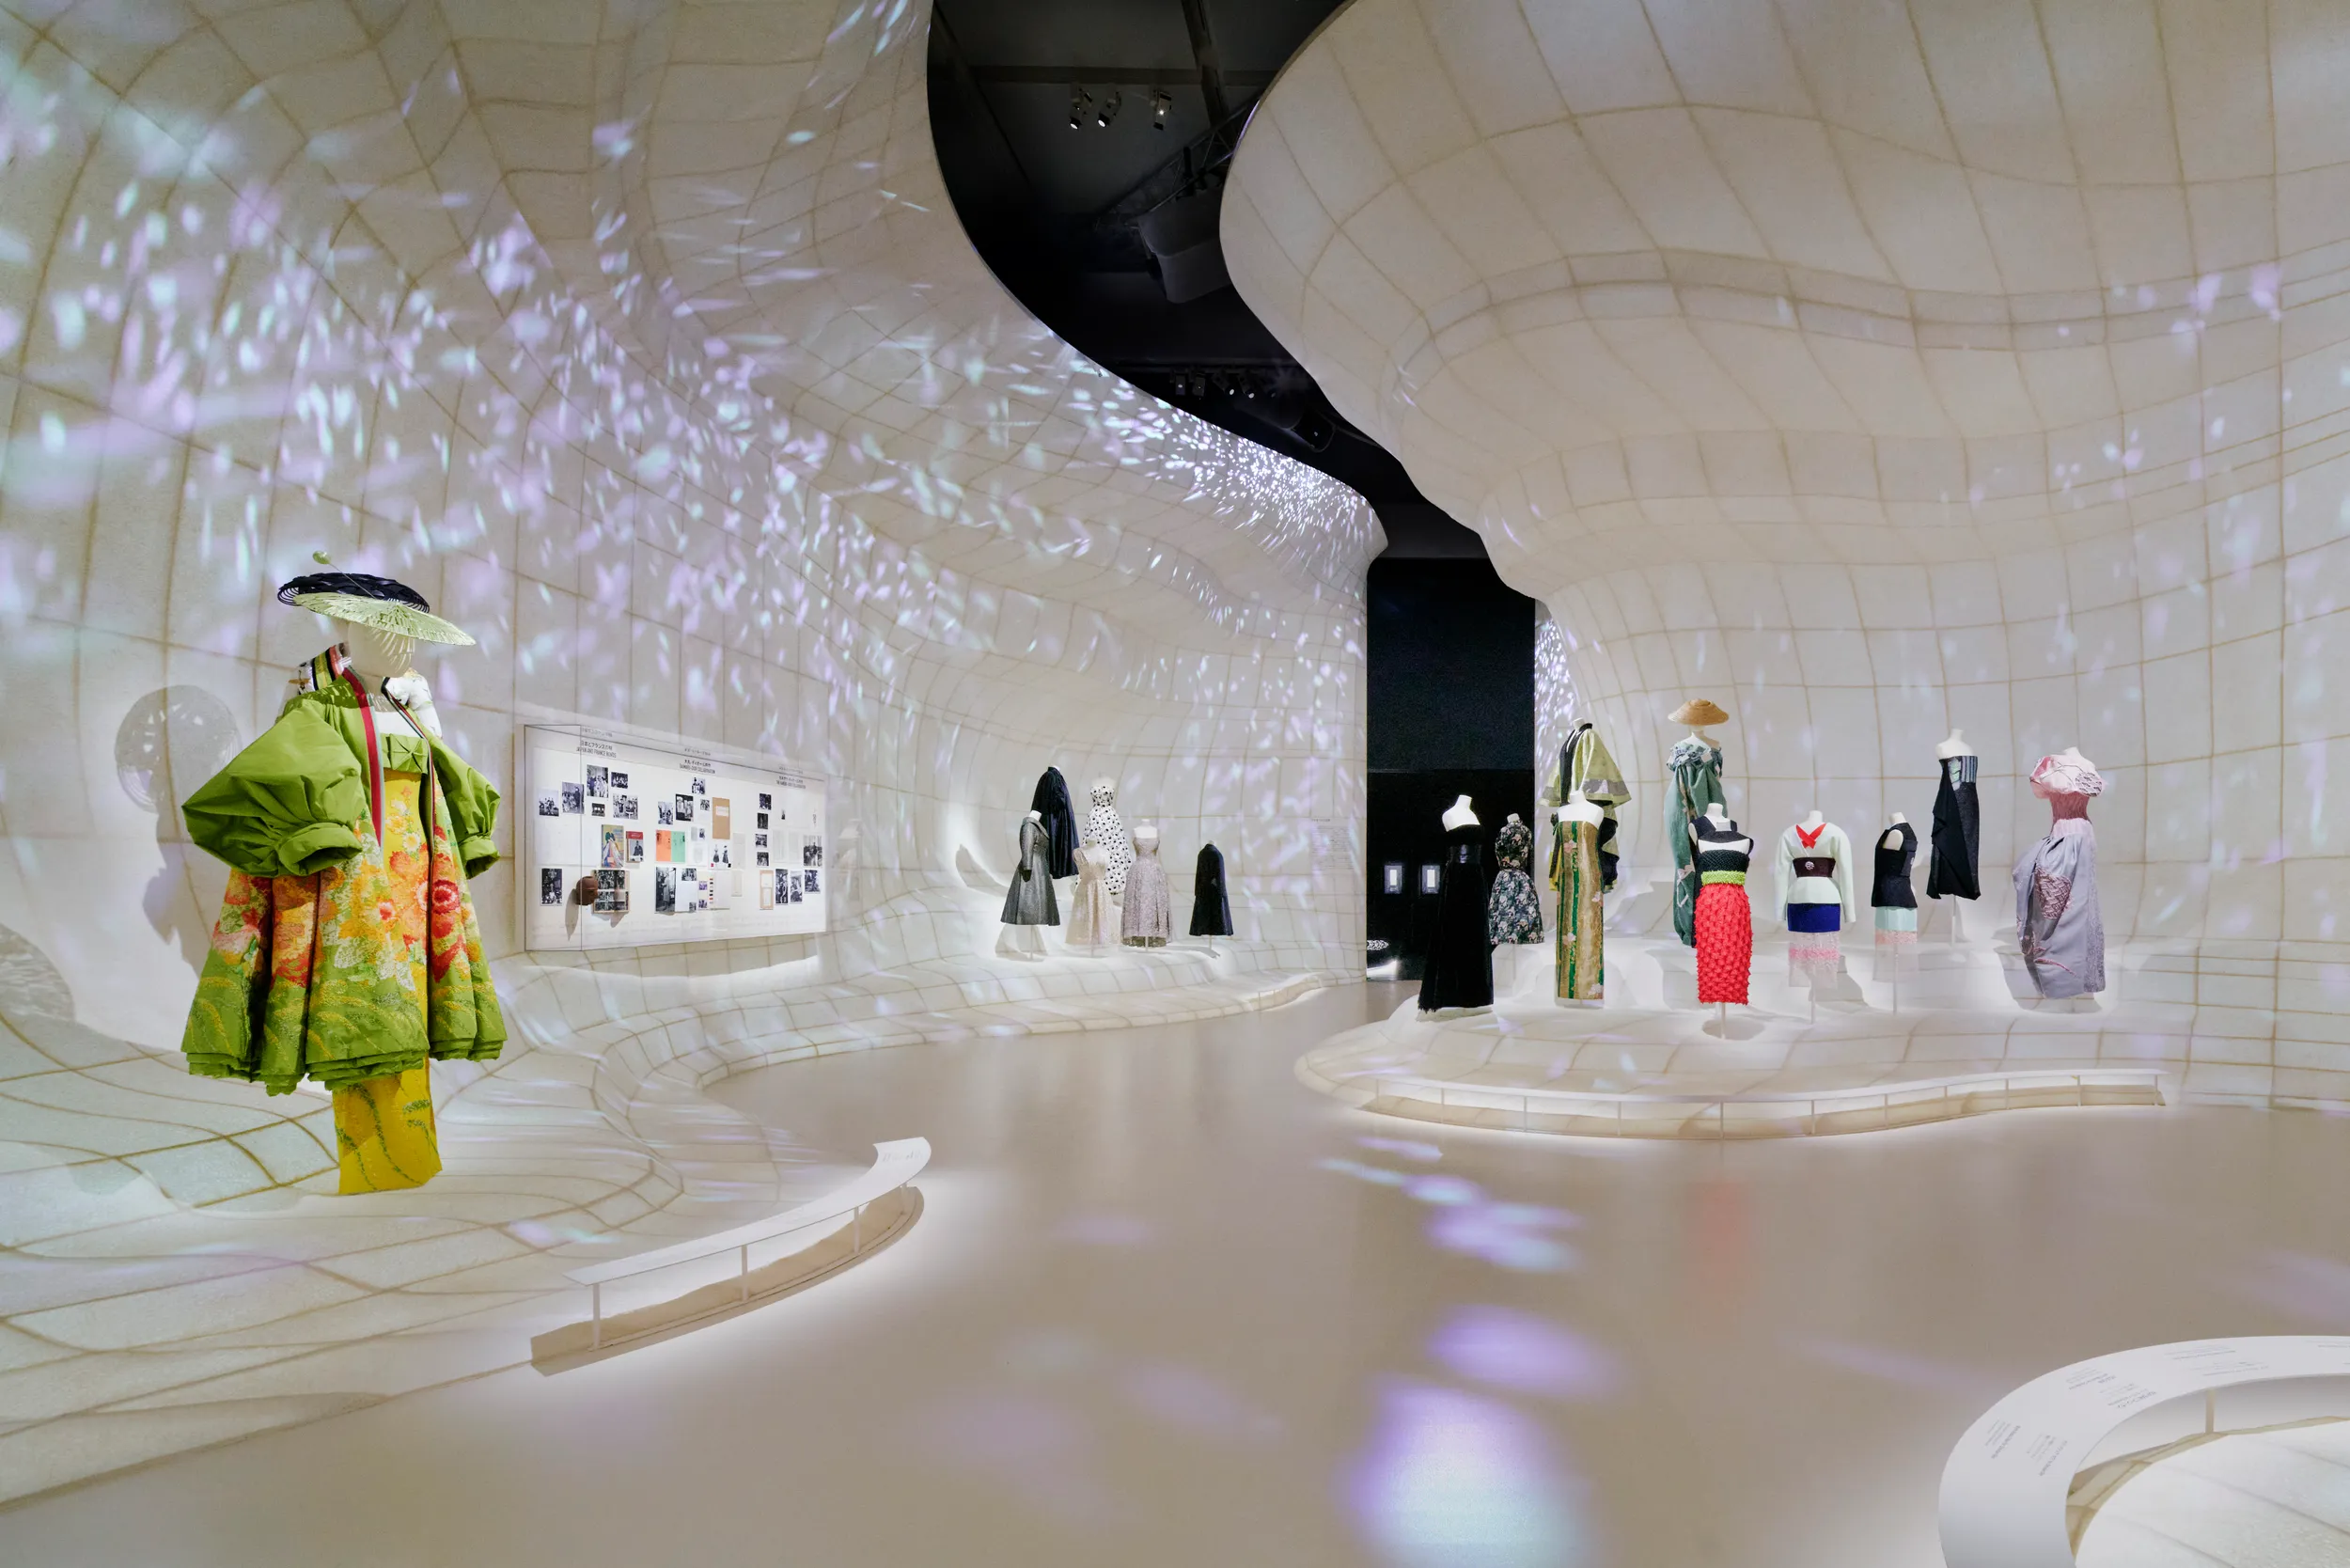 Christian Dior's Inspiration on Display at the Musée de Arts